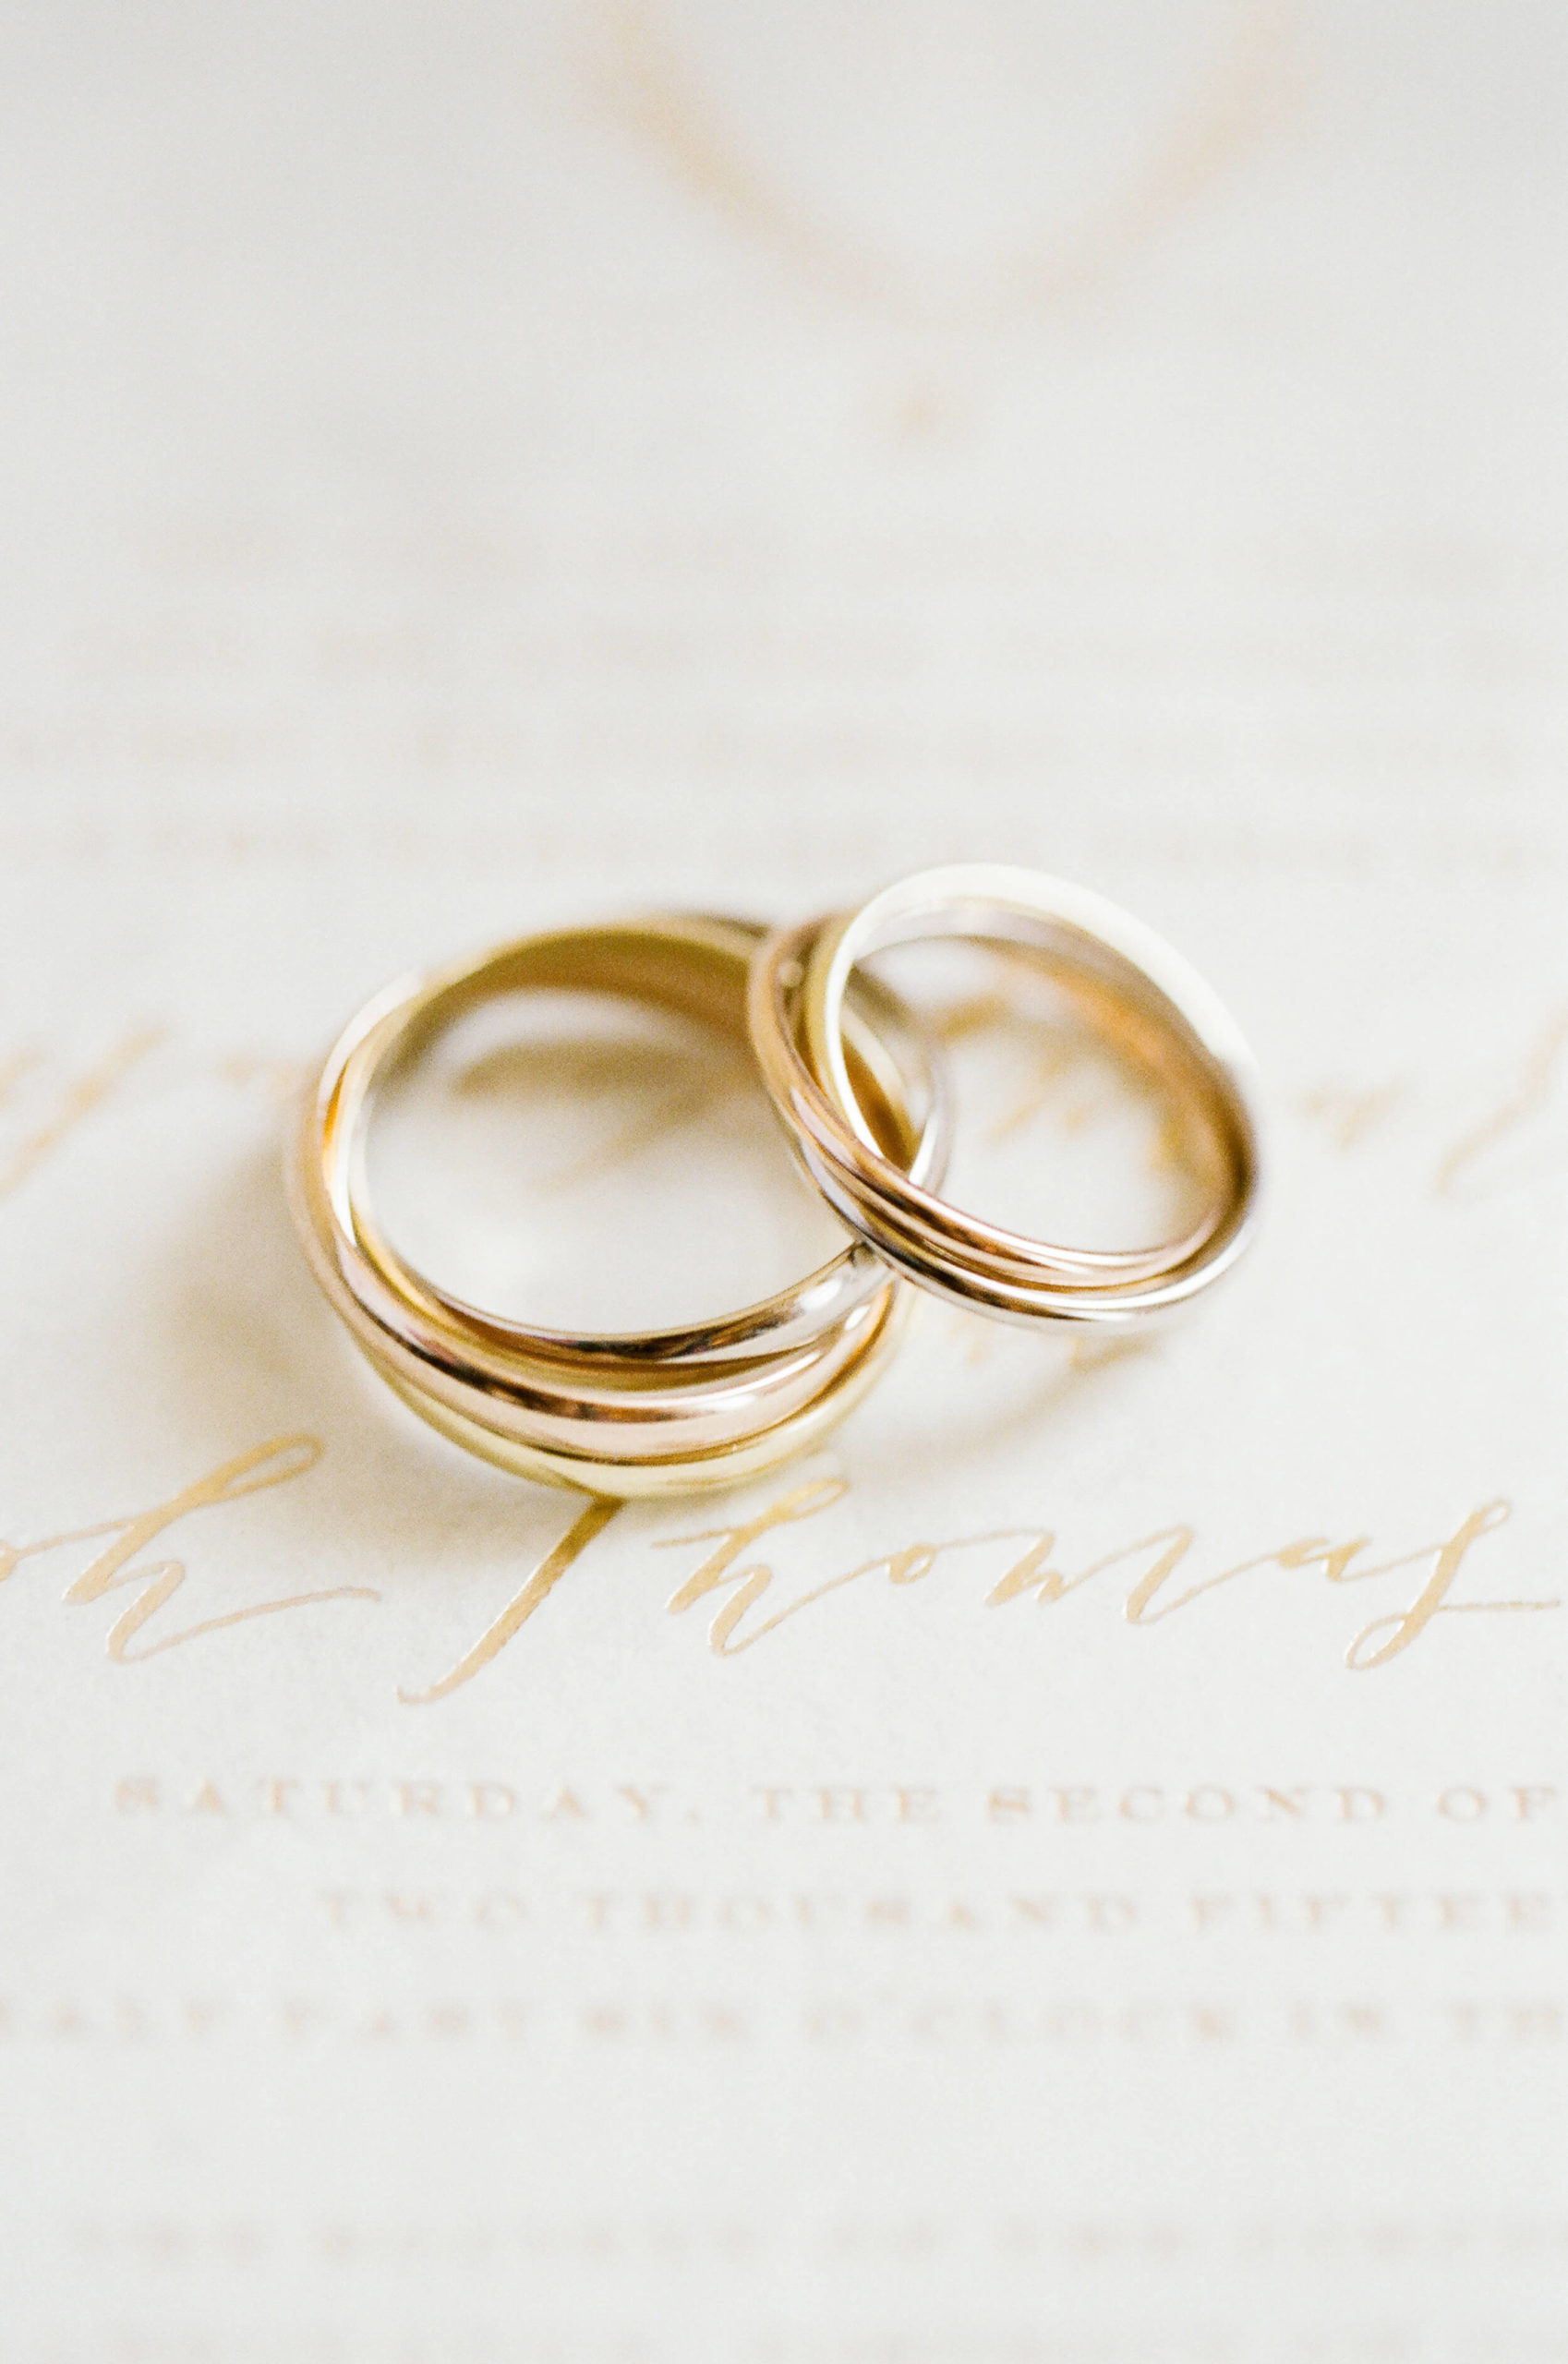 gold wedding bands on top of wedding invitation